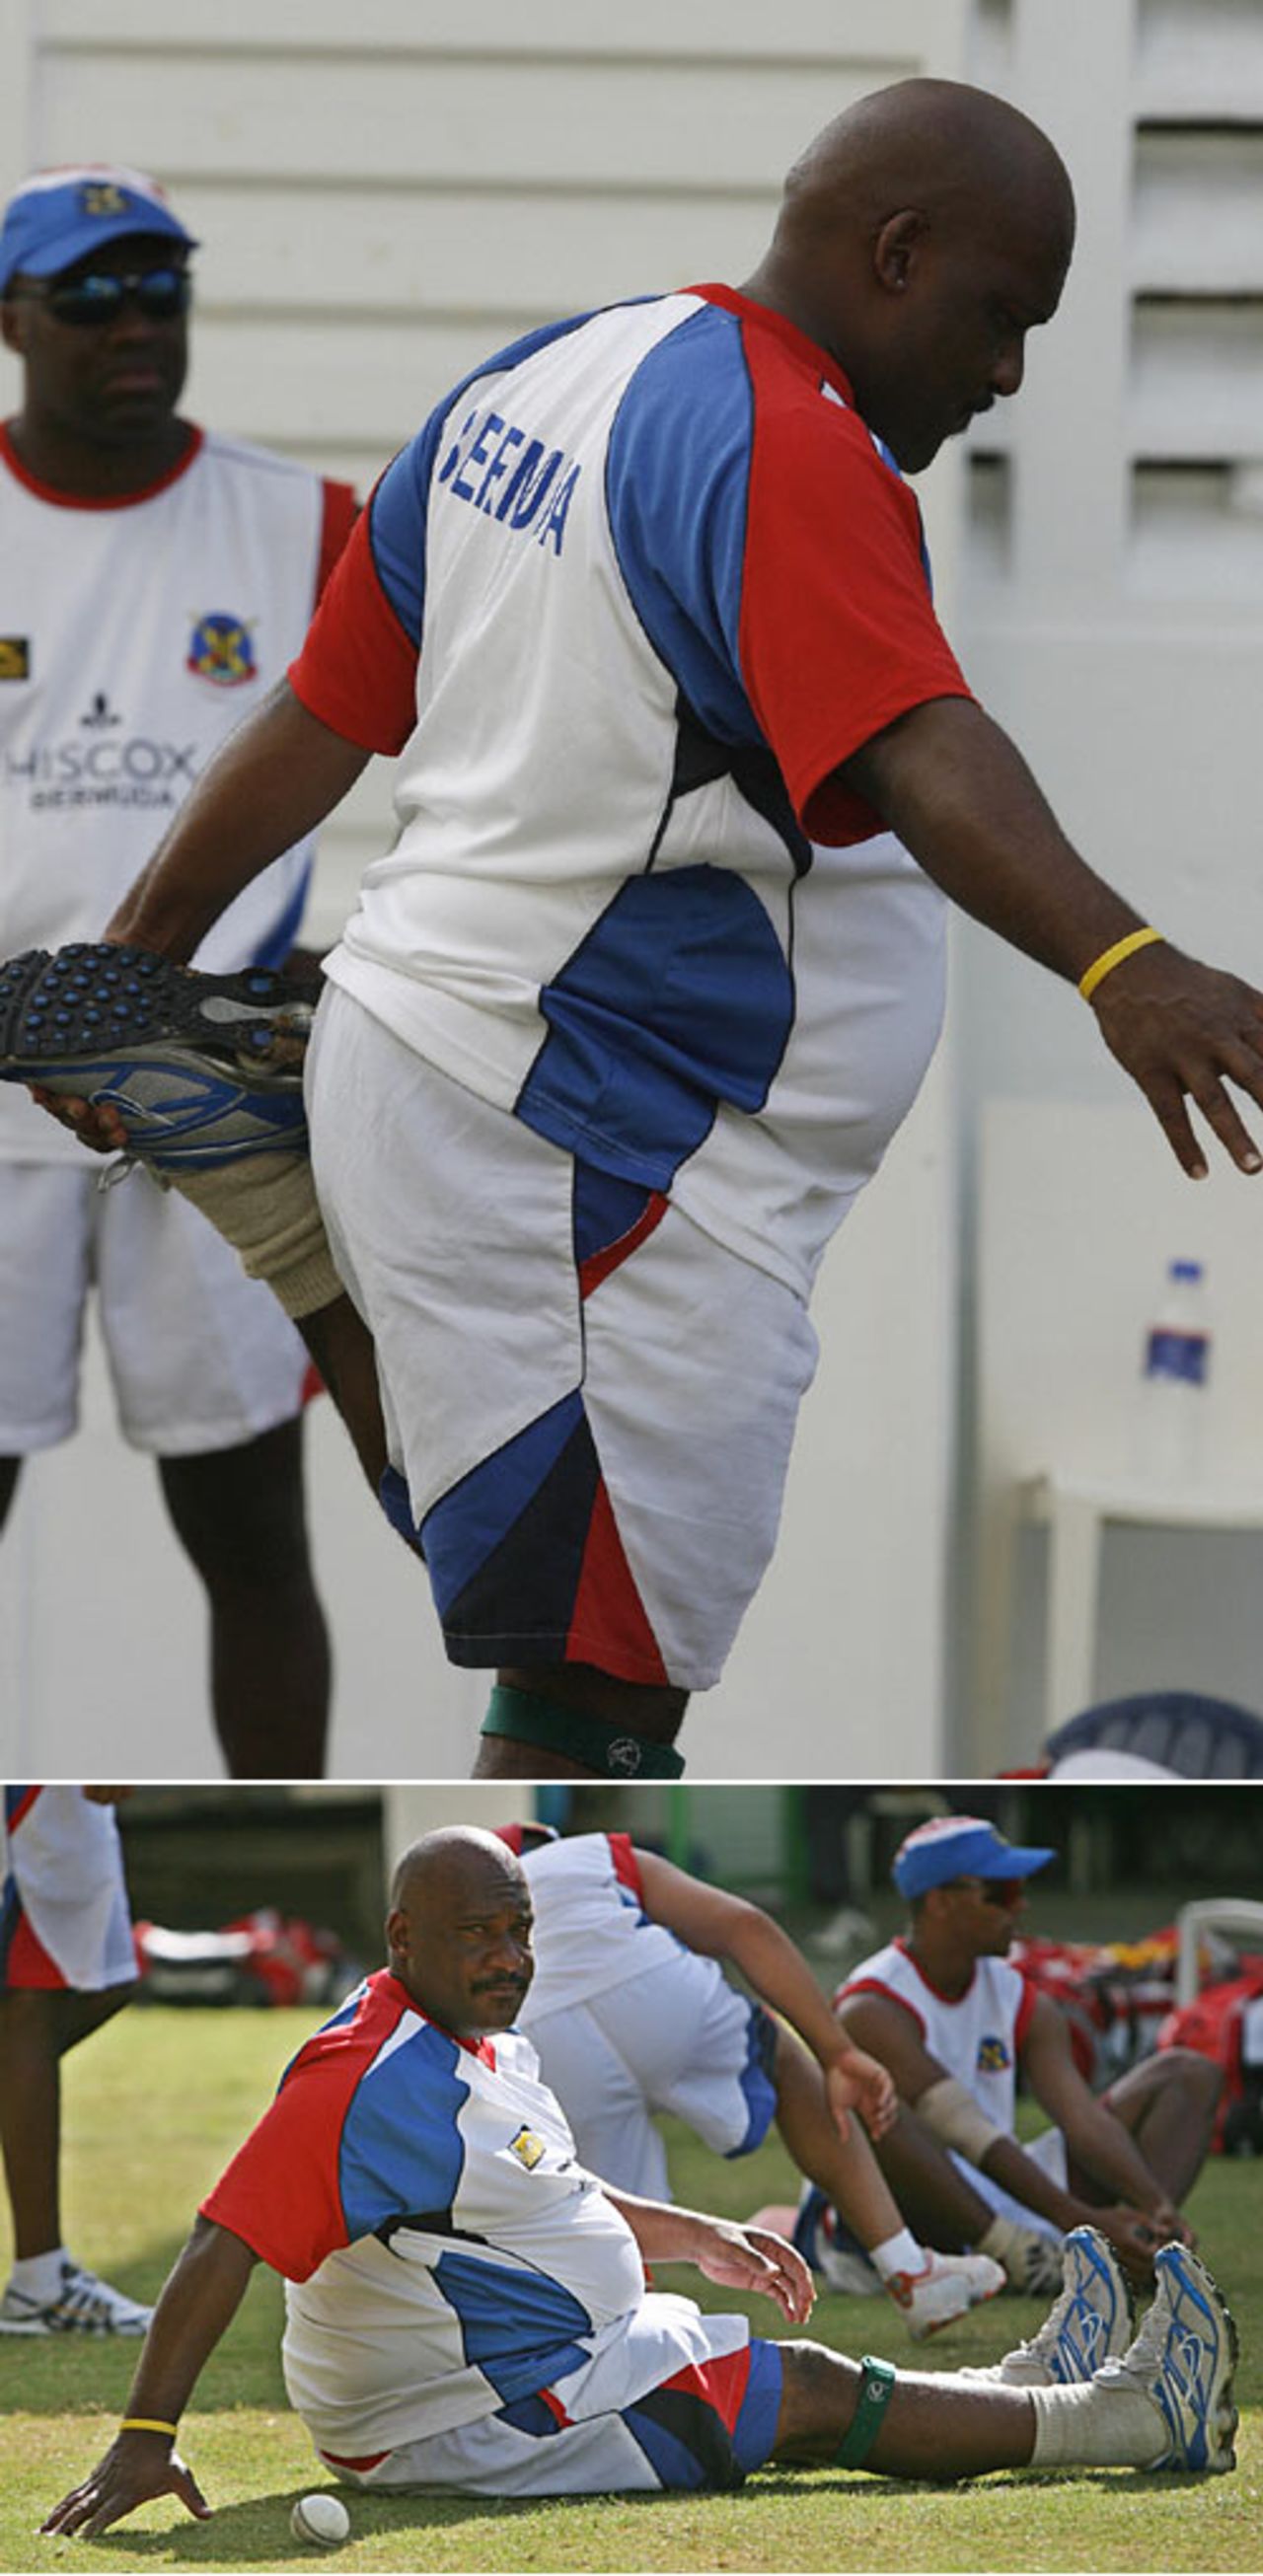 A quick stretch and a sit down for Bermuda's Dwayne Leverock, Queen's Park Oval, Port-of-Spain, March 18, 2007